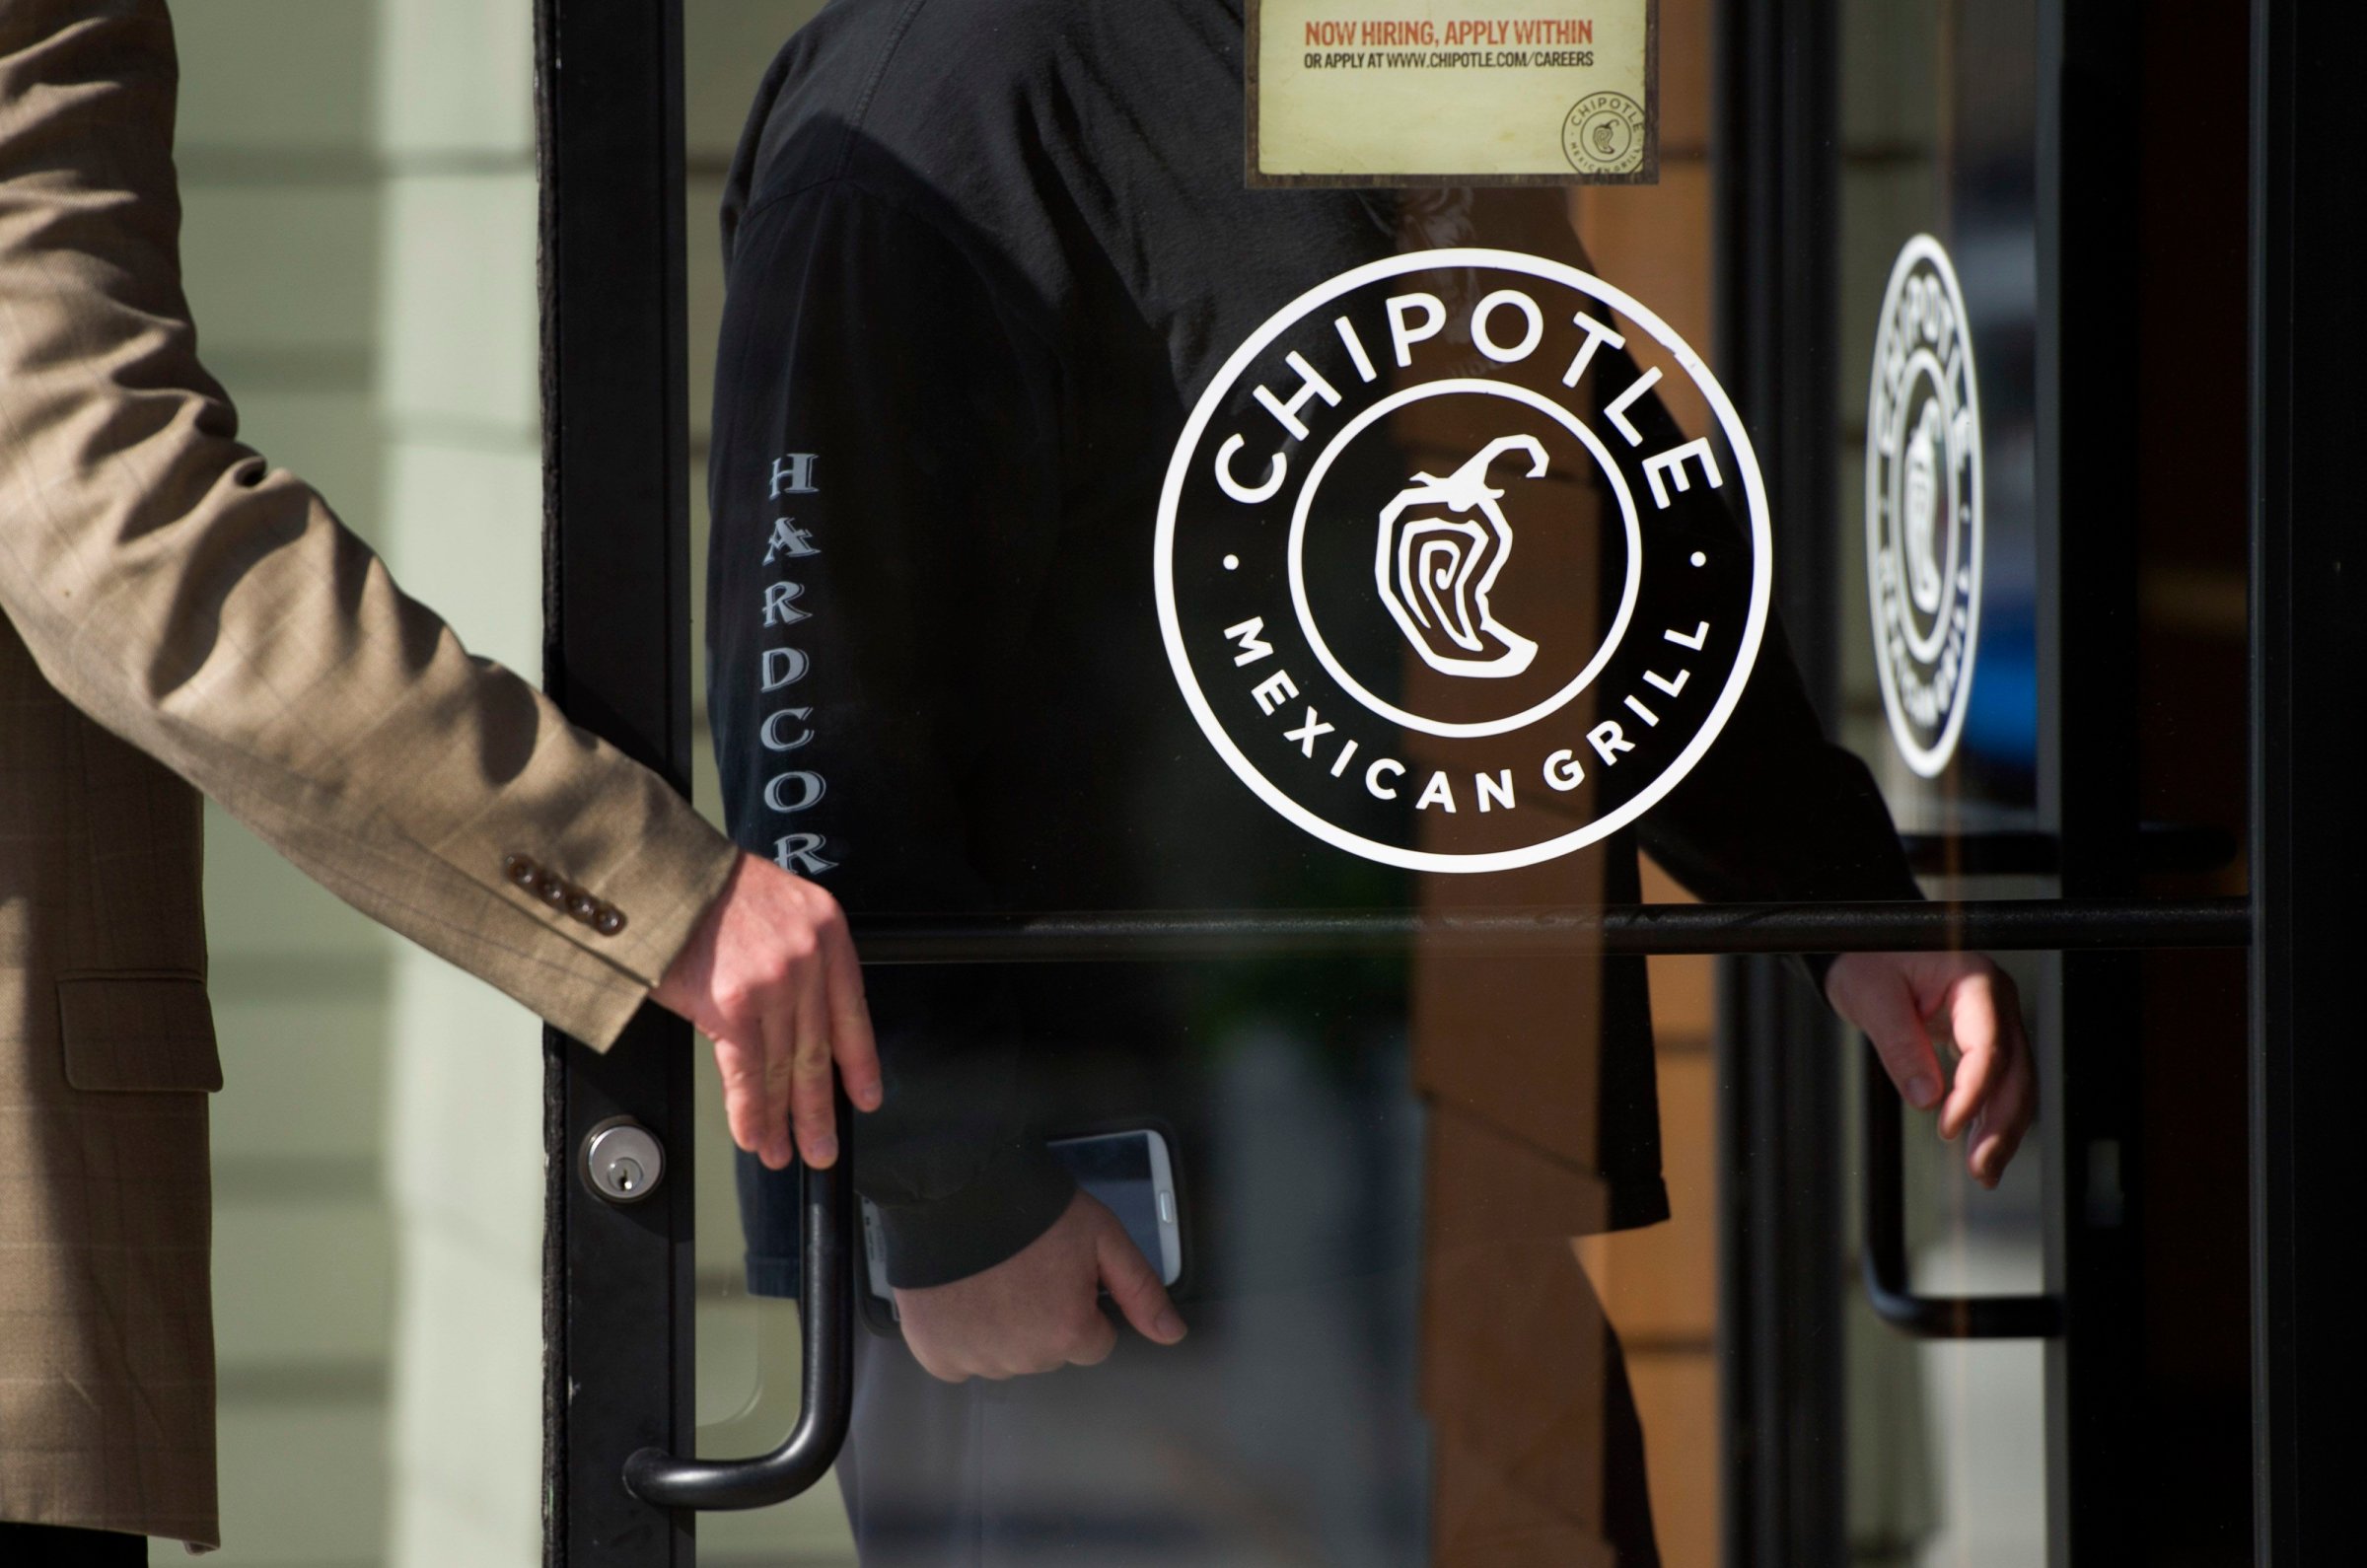 Pedestrians enter a Chipotle Mexican Grill  in Martinez, California, U.S., on Monday, Feb. 2, 2015. Chipotle Mexican Grill is expected to release earnings figures on Feb 3. Photographer: David Paul Morris/Bloomberg